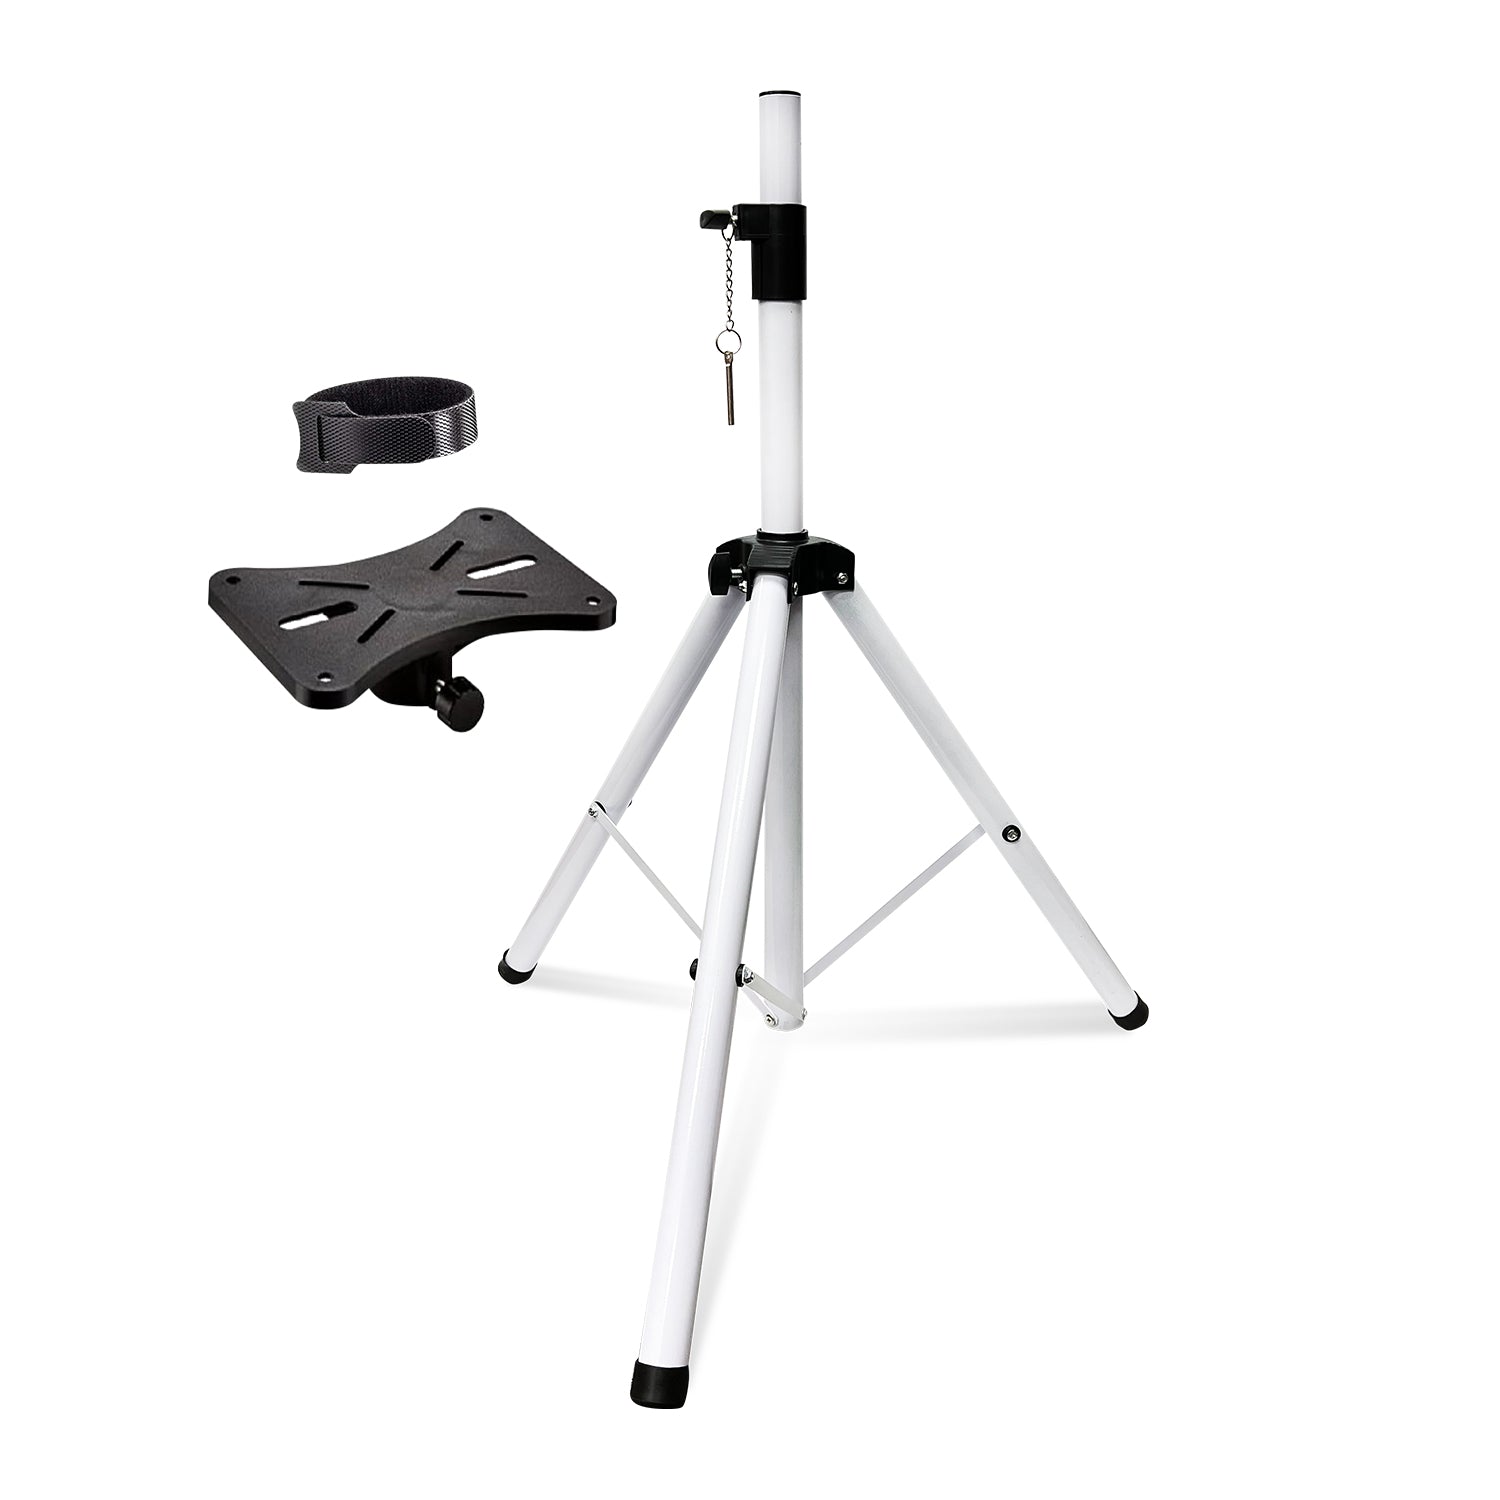 5 Core PA Speaker Stands Short Height Adjustable Professional DJ Tripod with Mounting Bracket, Extend from 40 to 72 inches, White SS ECO 1PK WH WoB